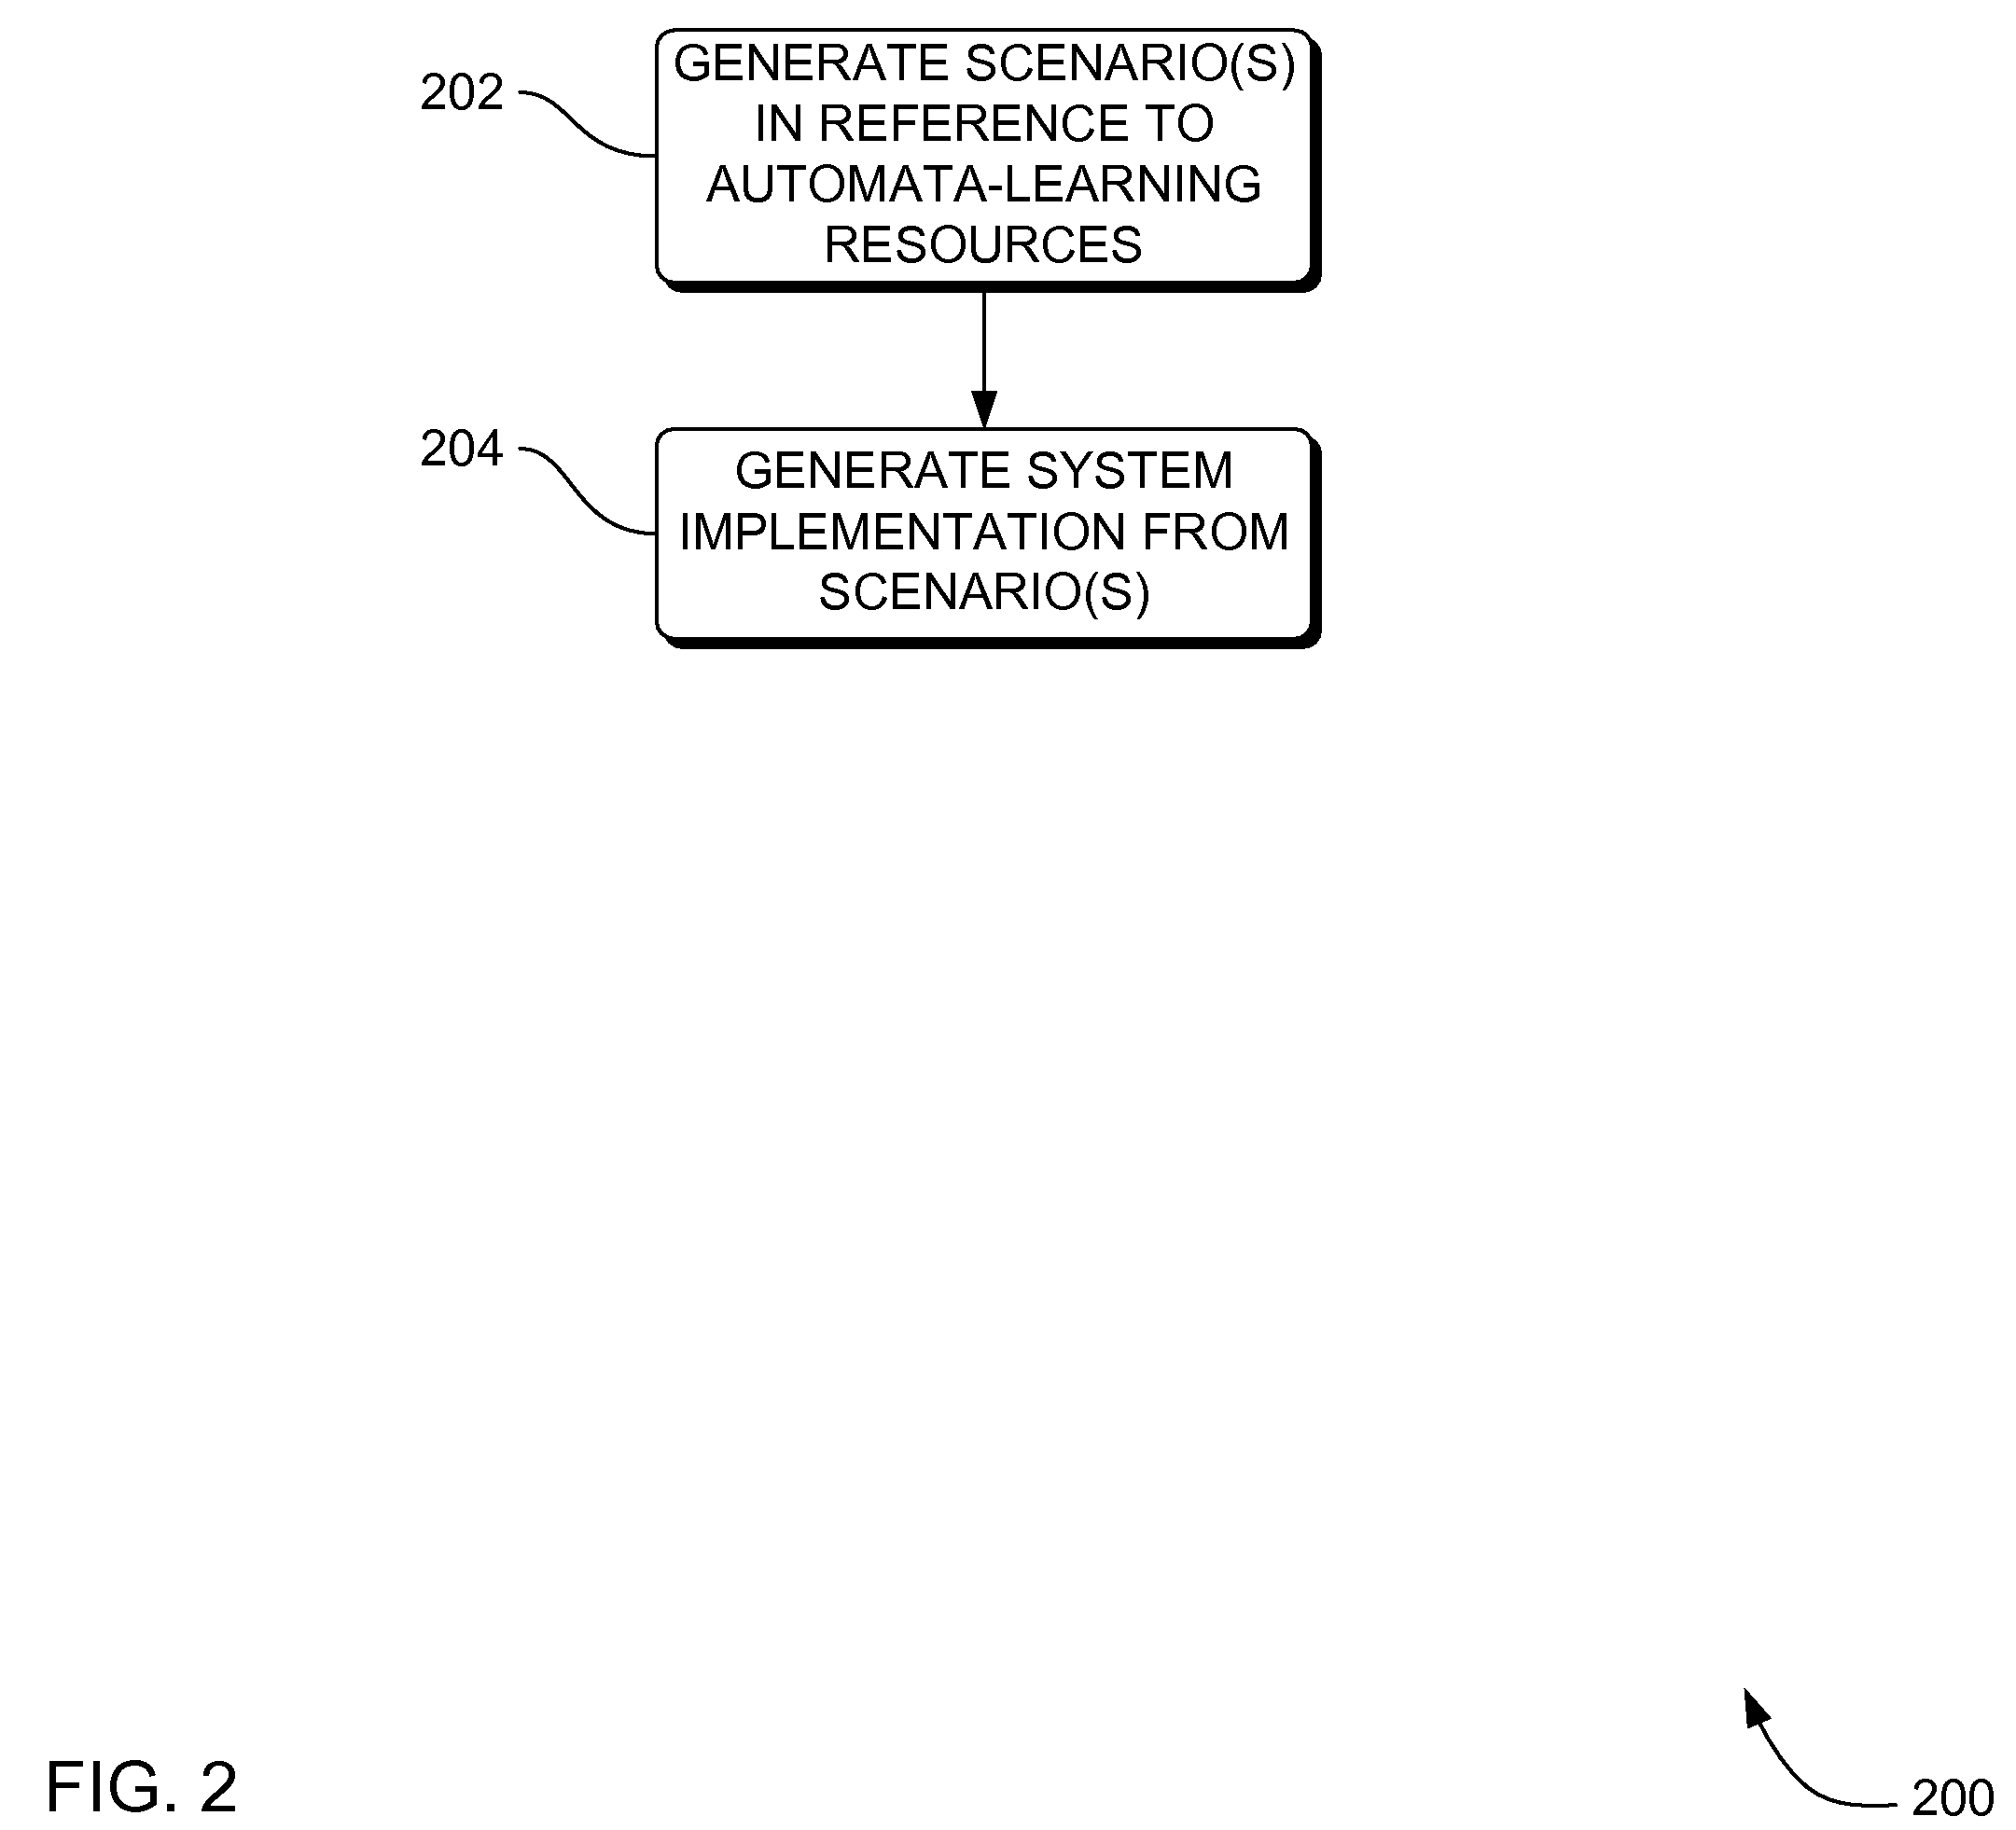 Systems, methods and apparatus for automata learning in generation of scenario-based requirements in system development